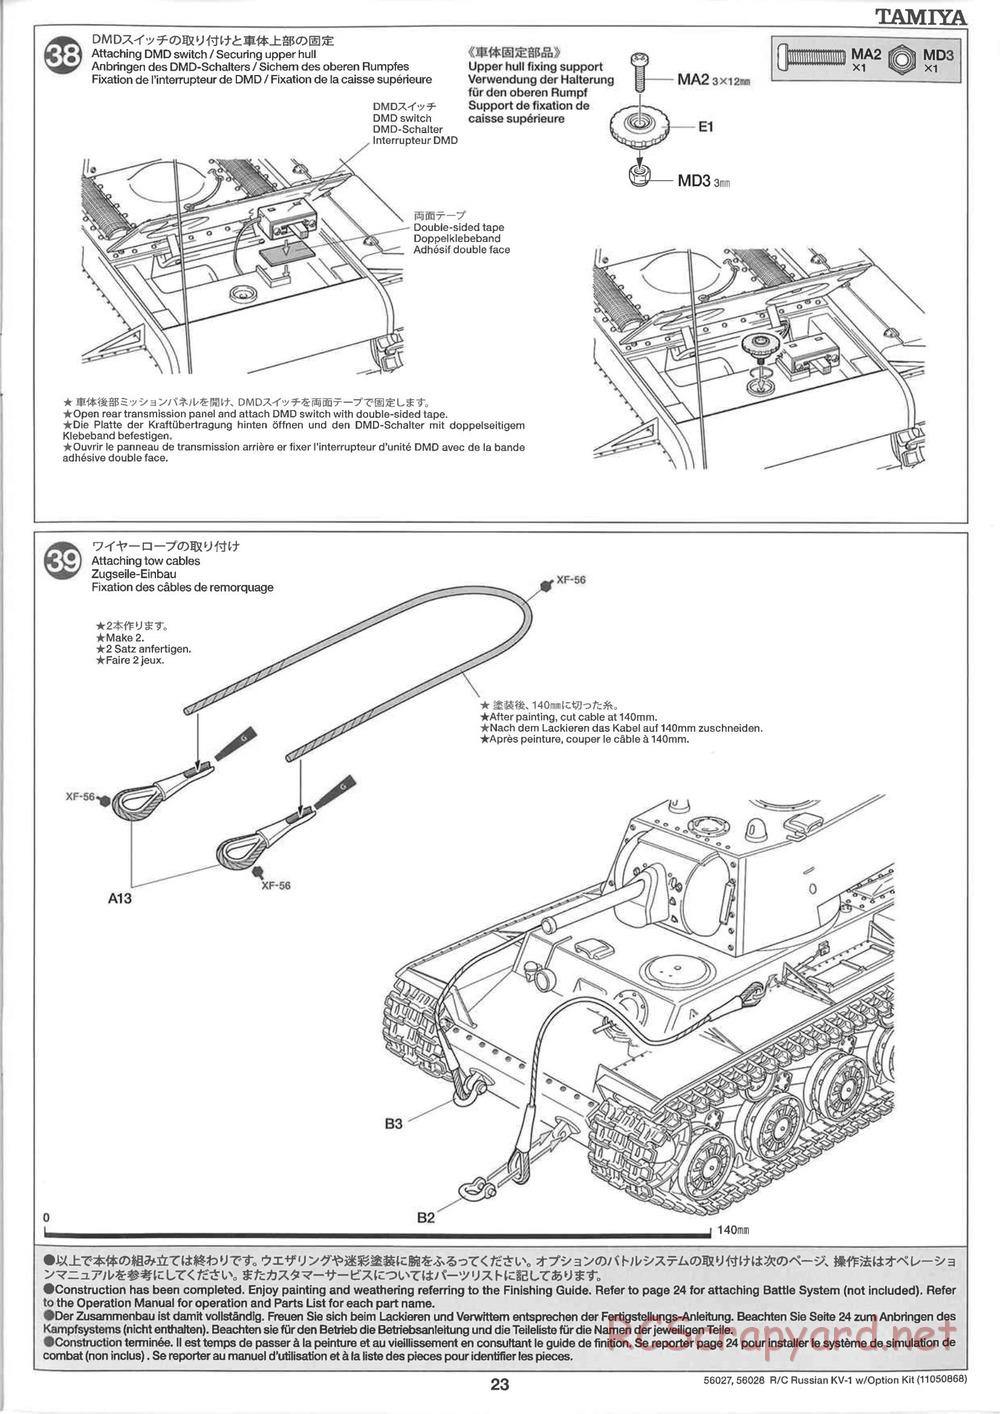 Tamiya - Russian Heavy Tank KV-1 - 1/16 Scale Chassis - Manual - Page 23